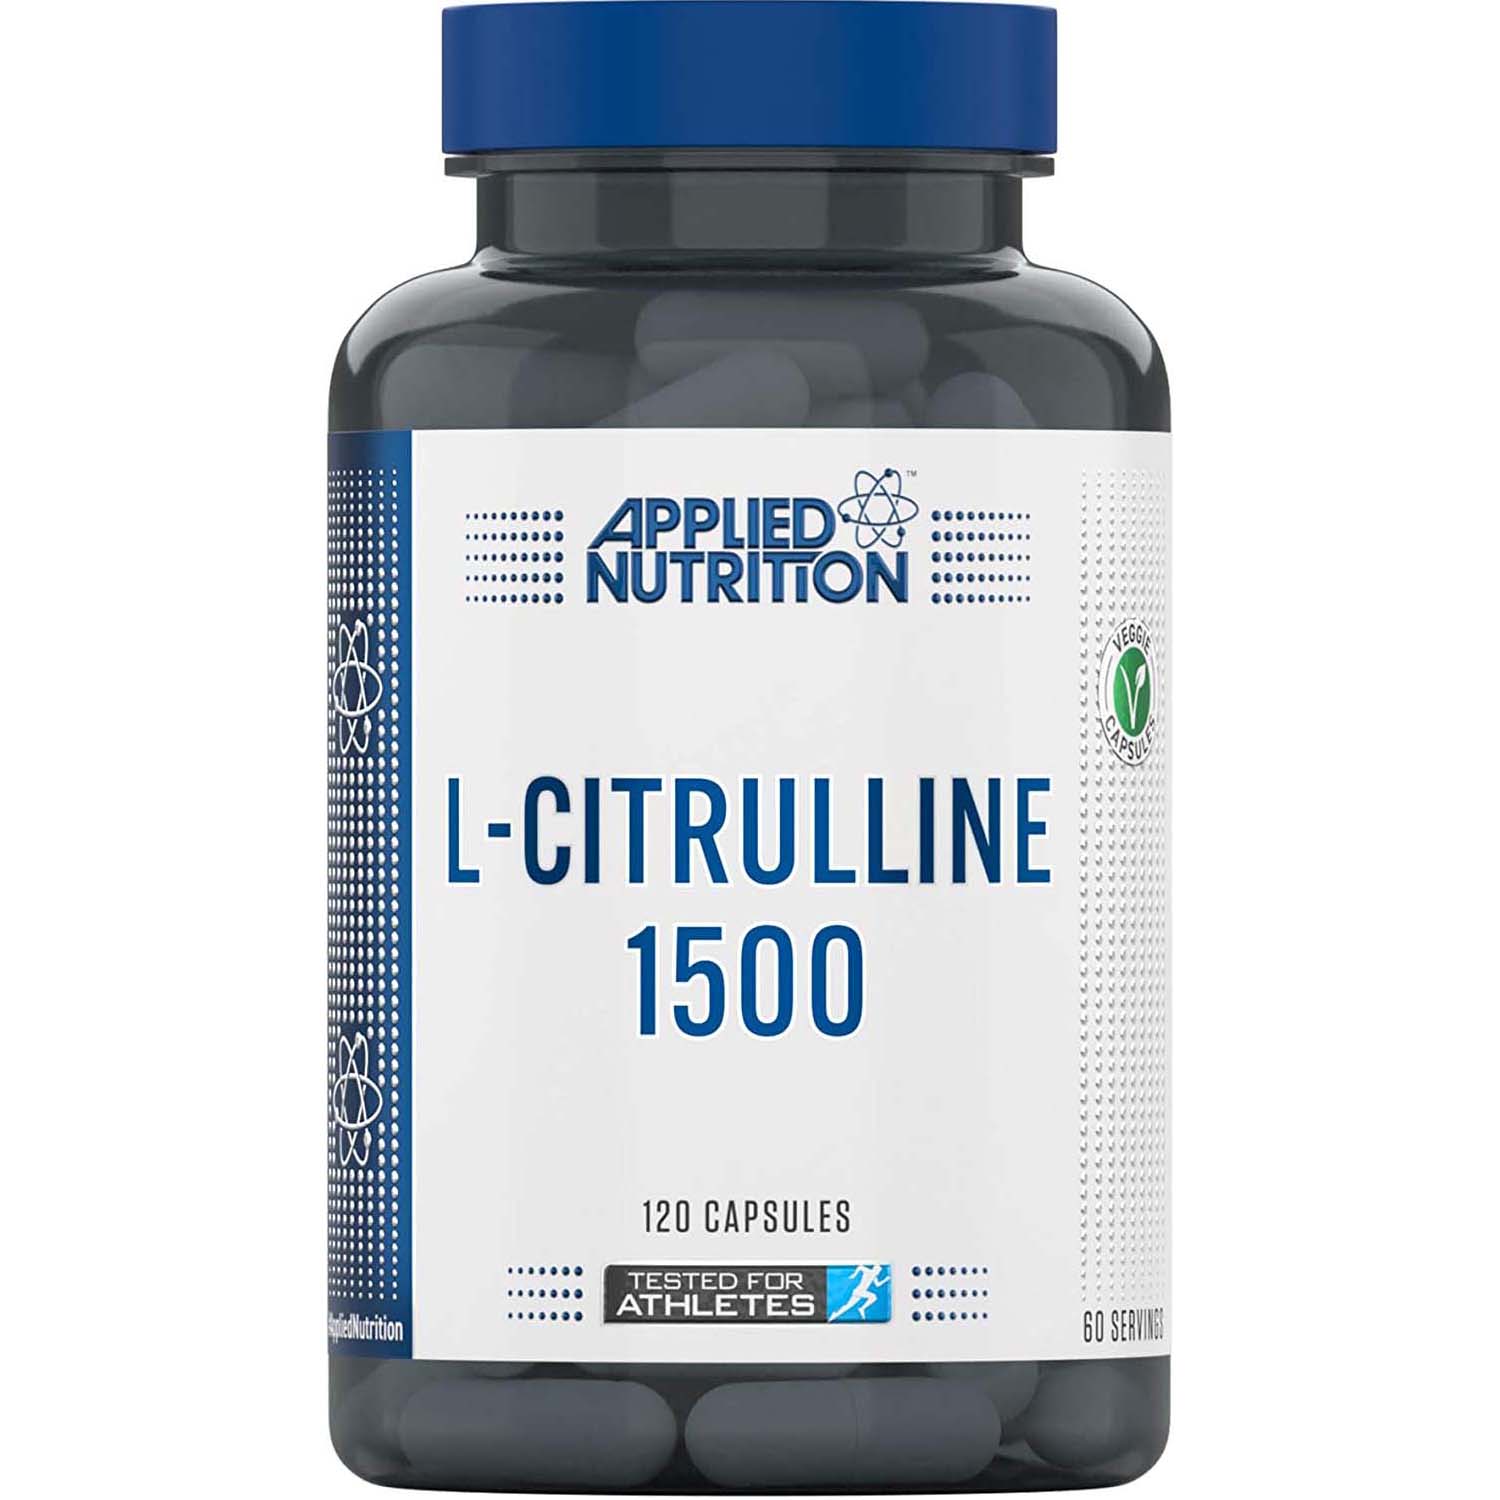 Applied Nutrition L Citrulline, 1500 mg, 120 Capsules